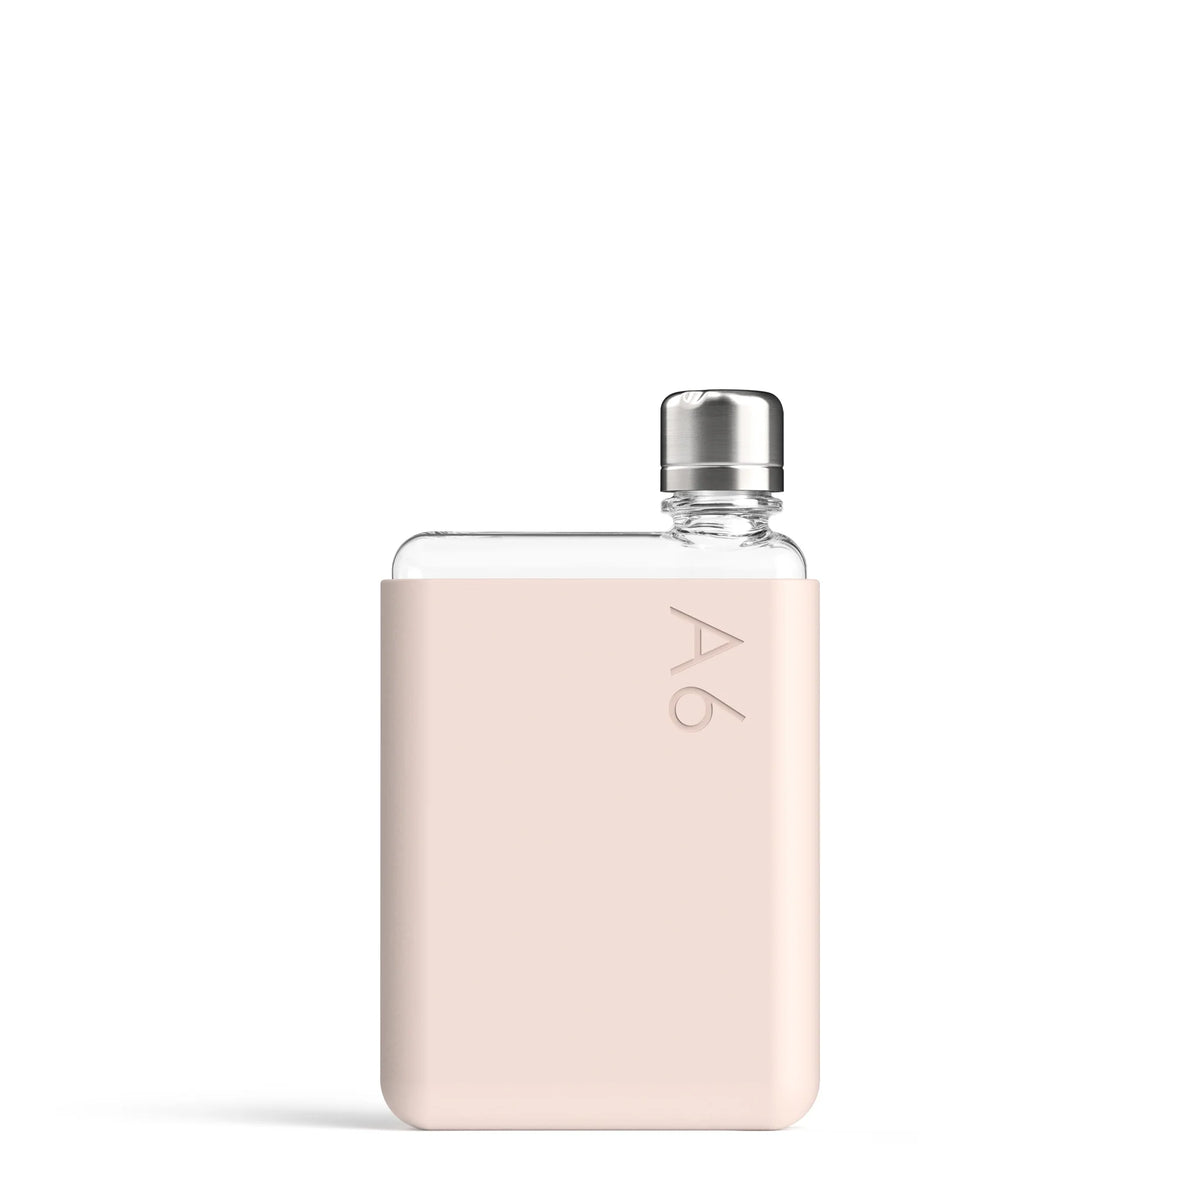 A6 memobottle Silicone Sleeve, Pale Coral | memobottle - Wake Concept Store  